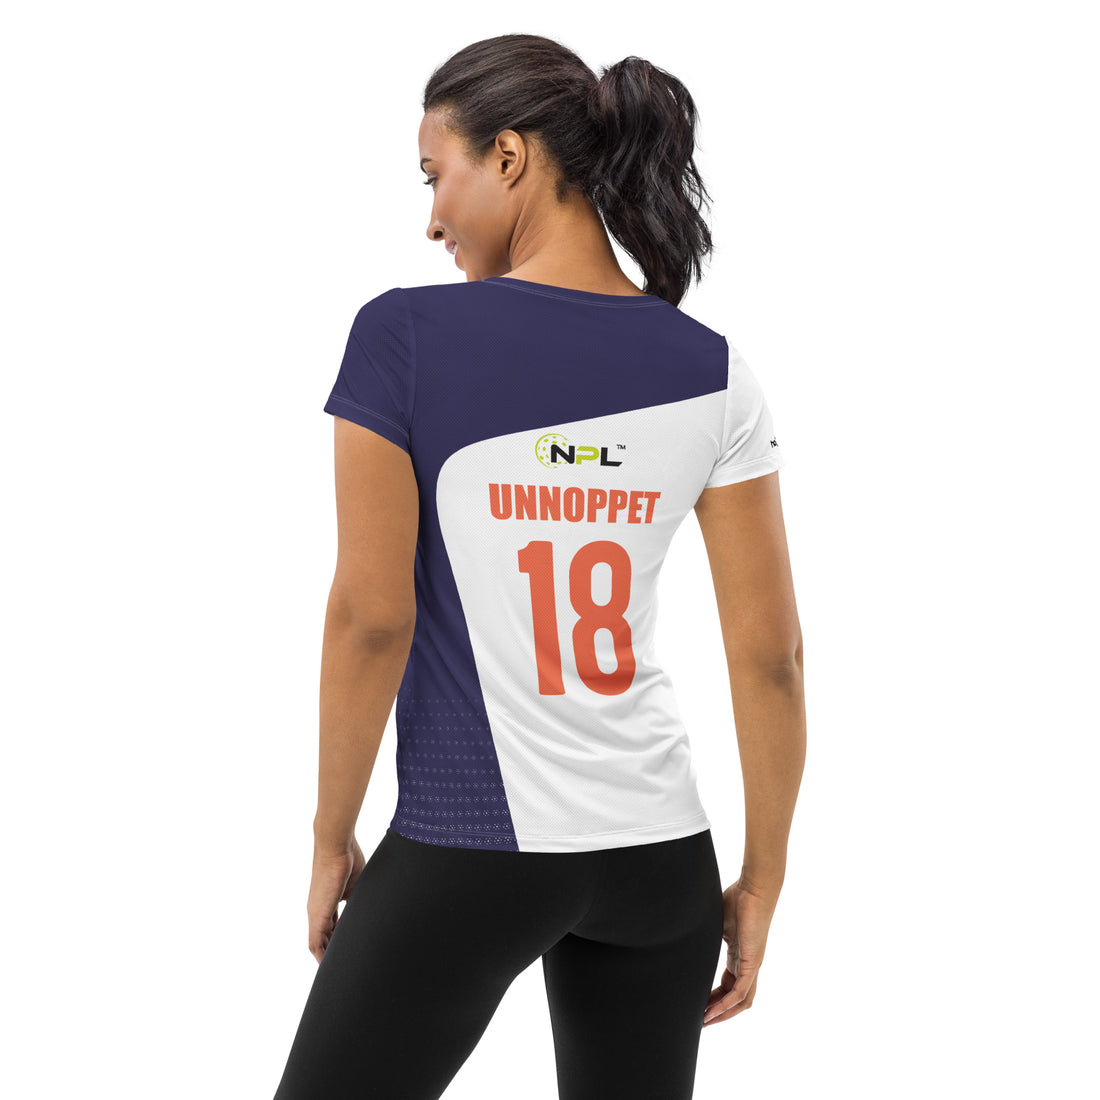 AYE UNNOPPET 18 NAPLES JBB UNITED™ SKYBLUE™  2023 Dual Tone Replica Jersey for Women - White and Violet Noir